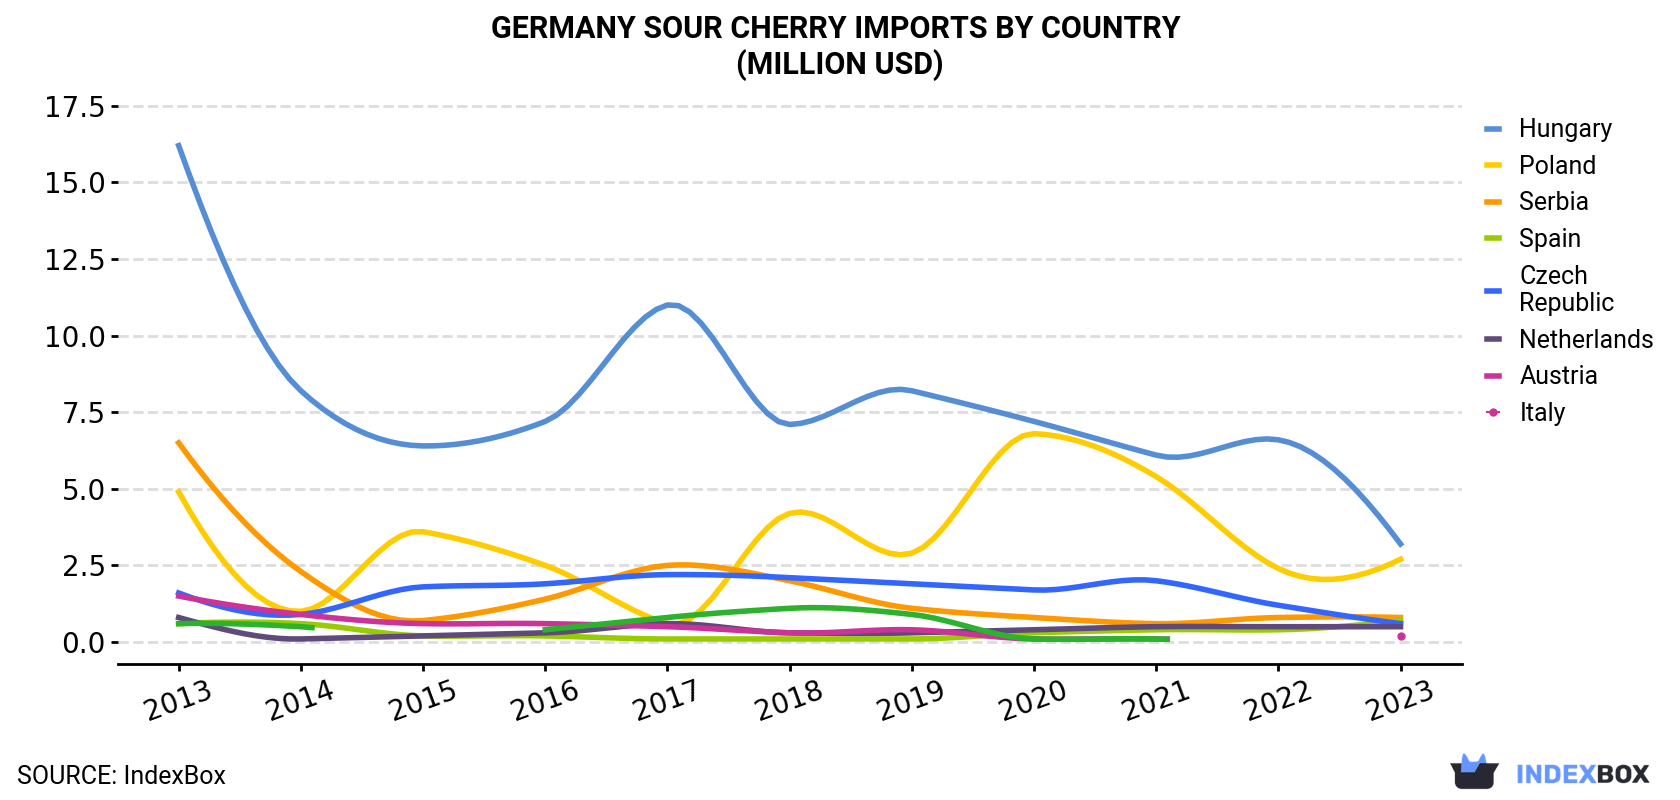 Germany Sour Cherry Imports By Country (Million USD)